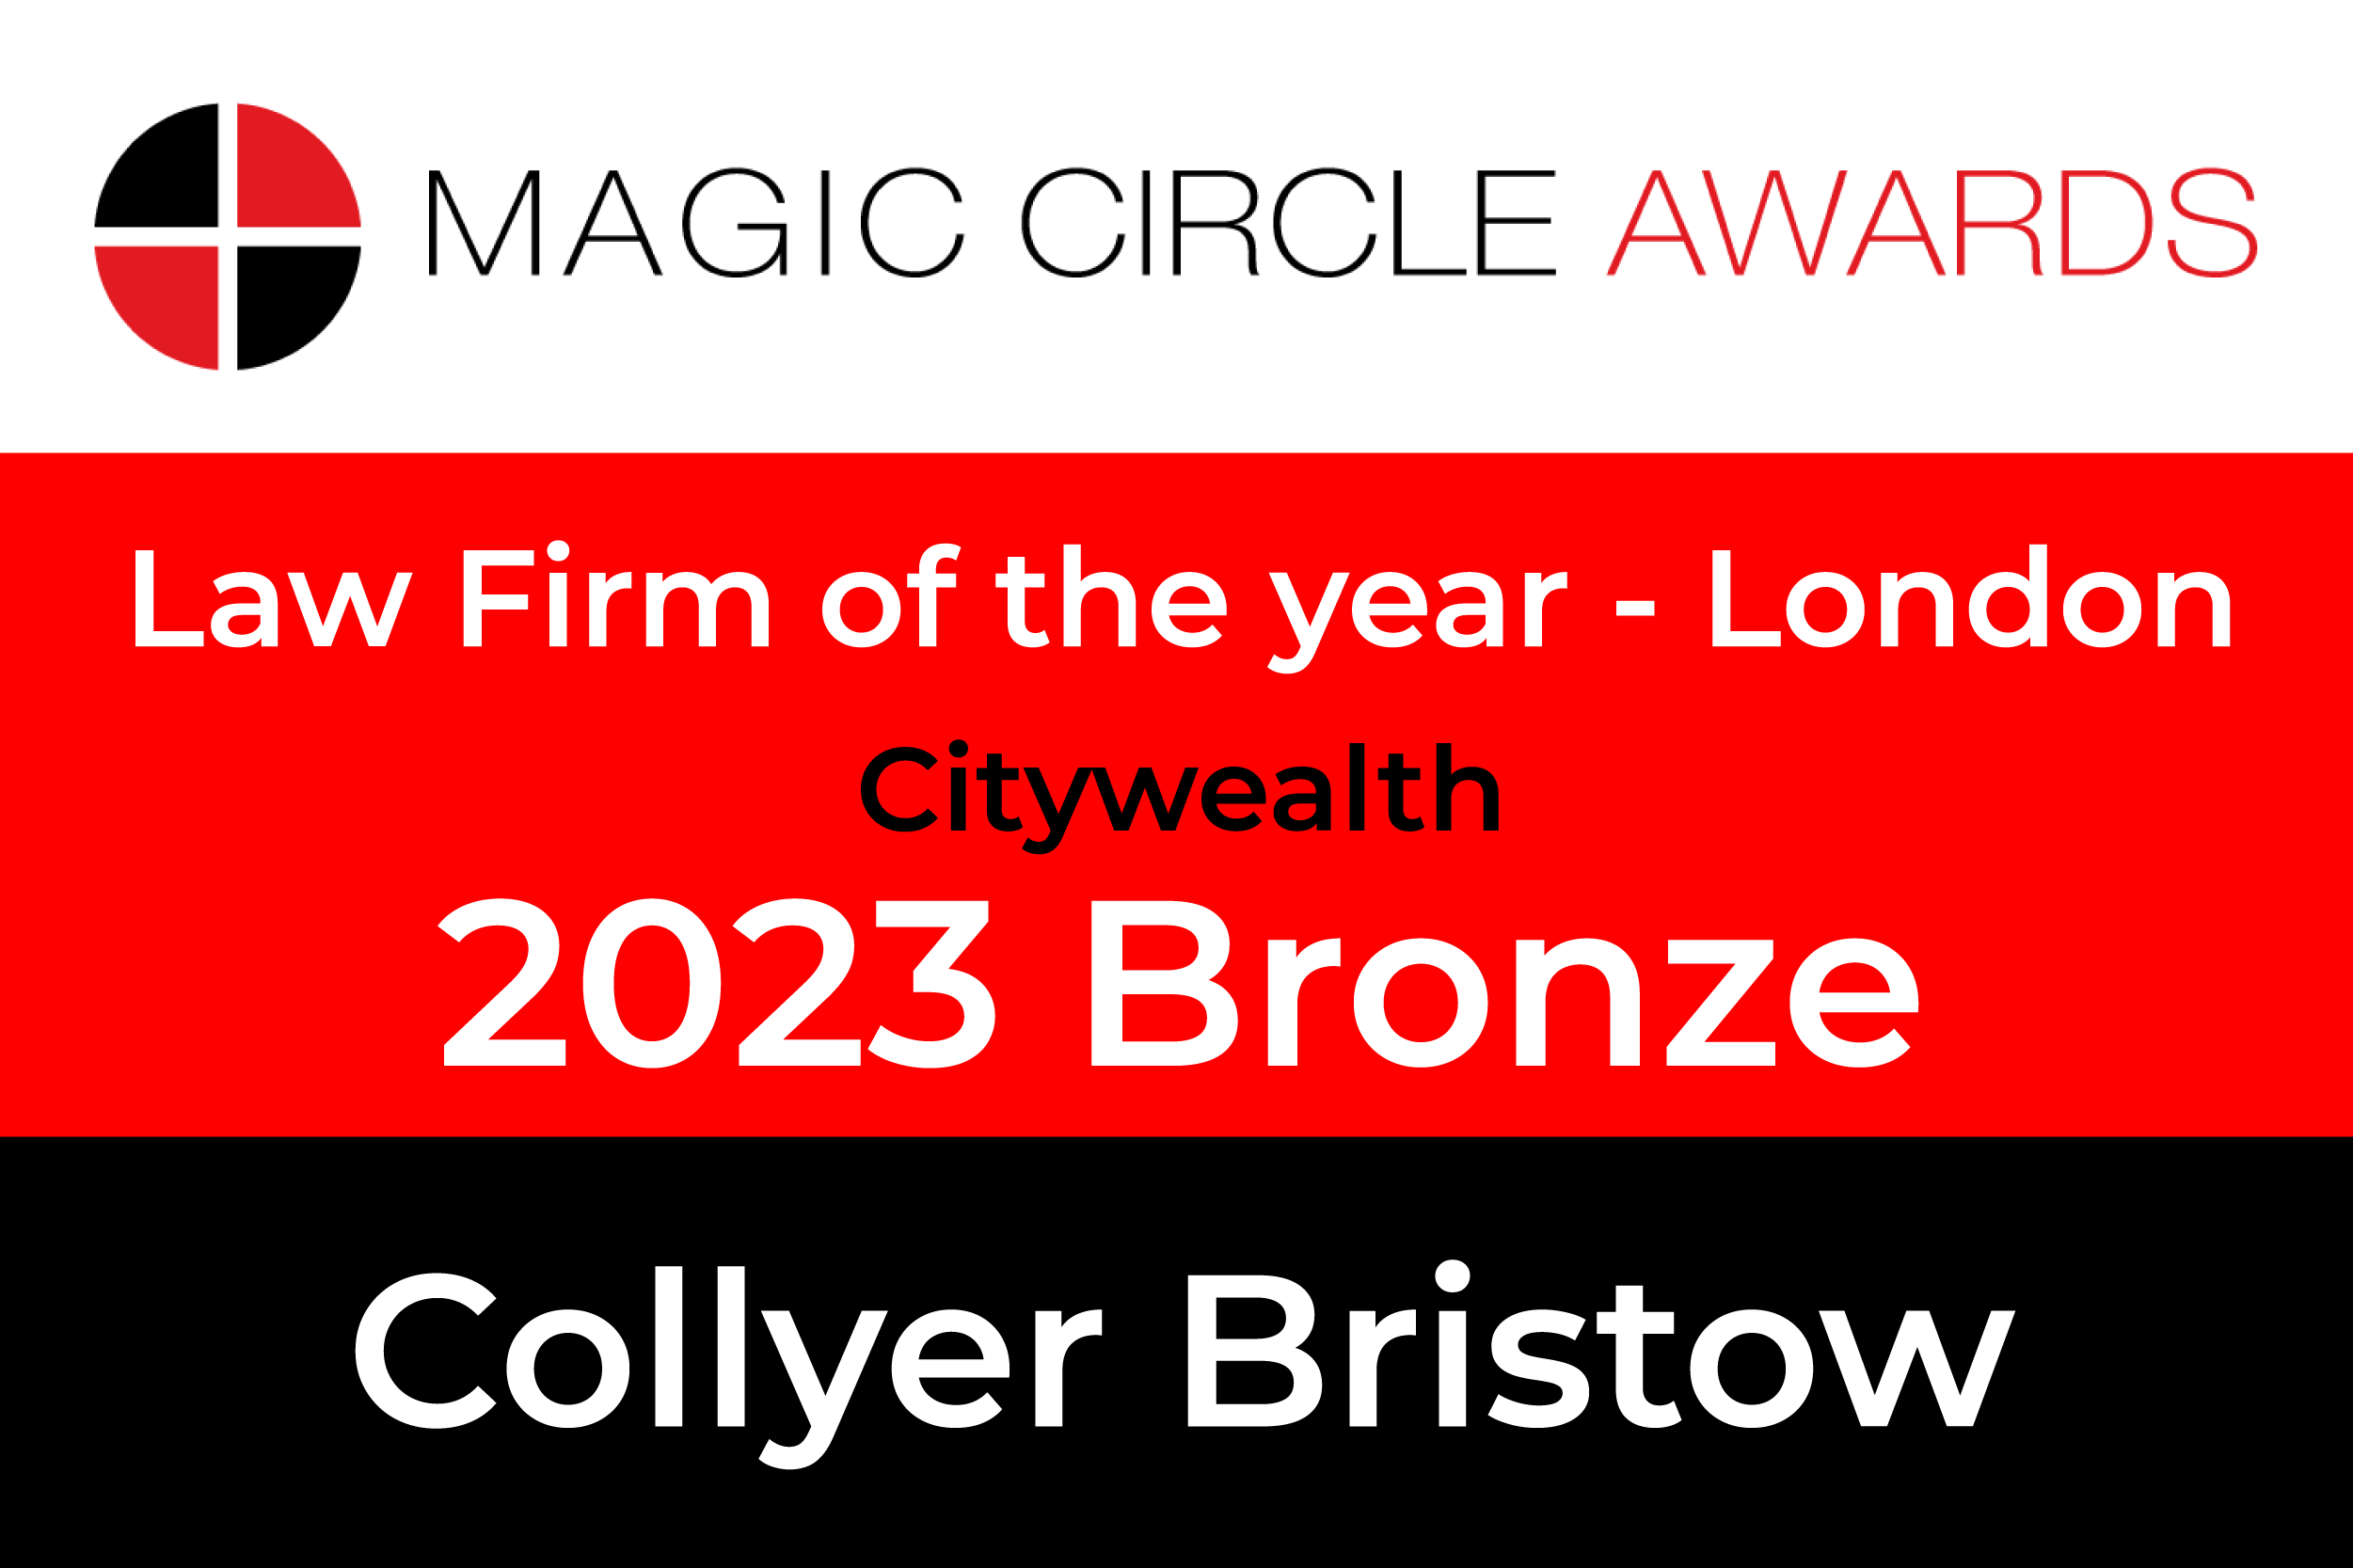 Collyer Bristow wins ‘Law Firm of the Year’ at CityWealth Magic Circle Awards